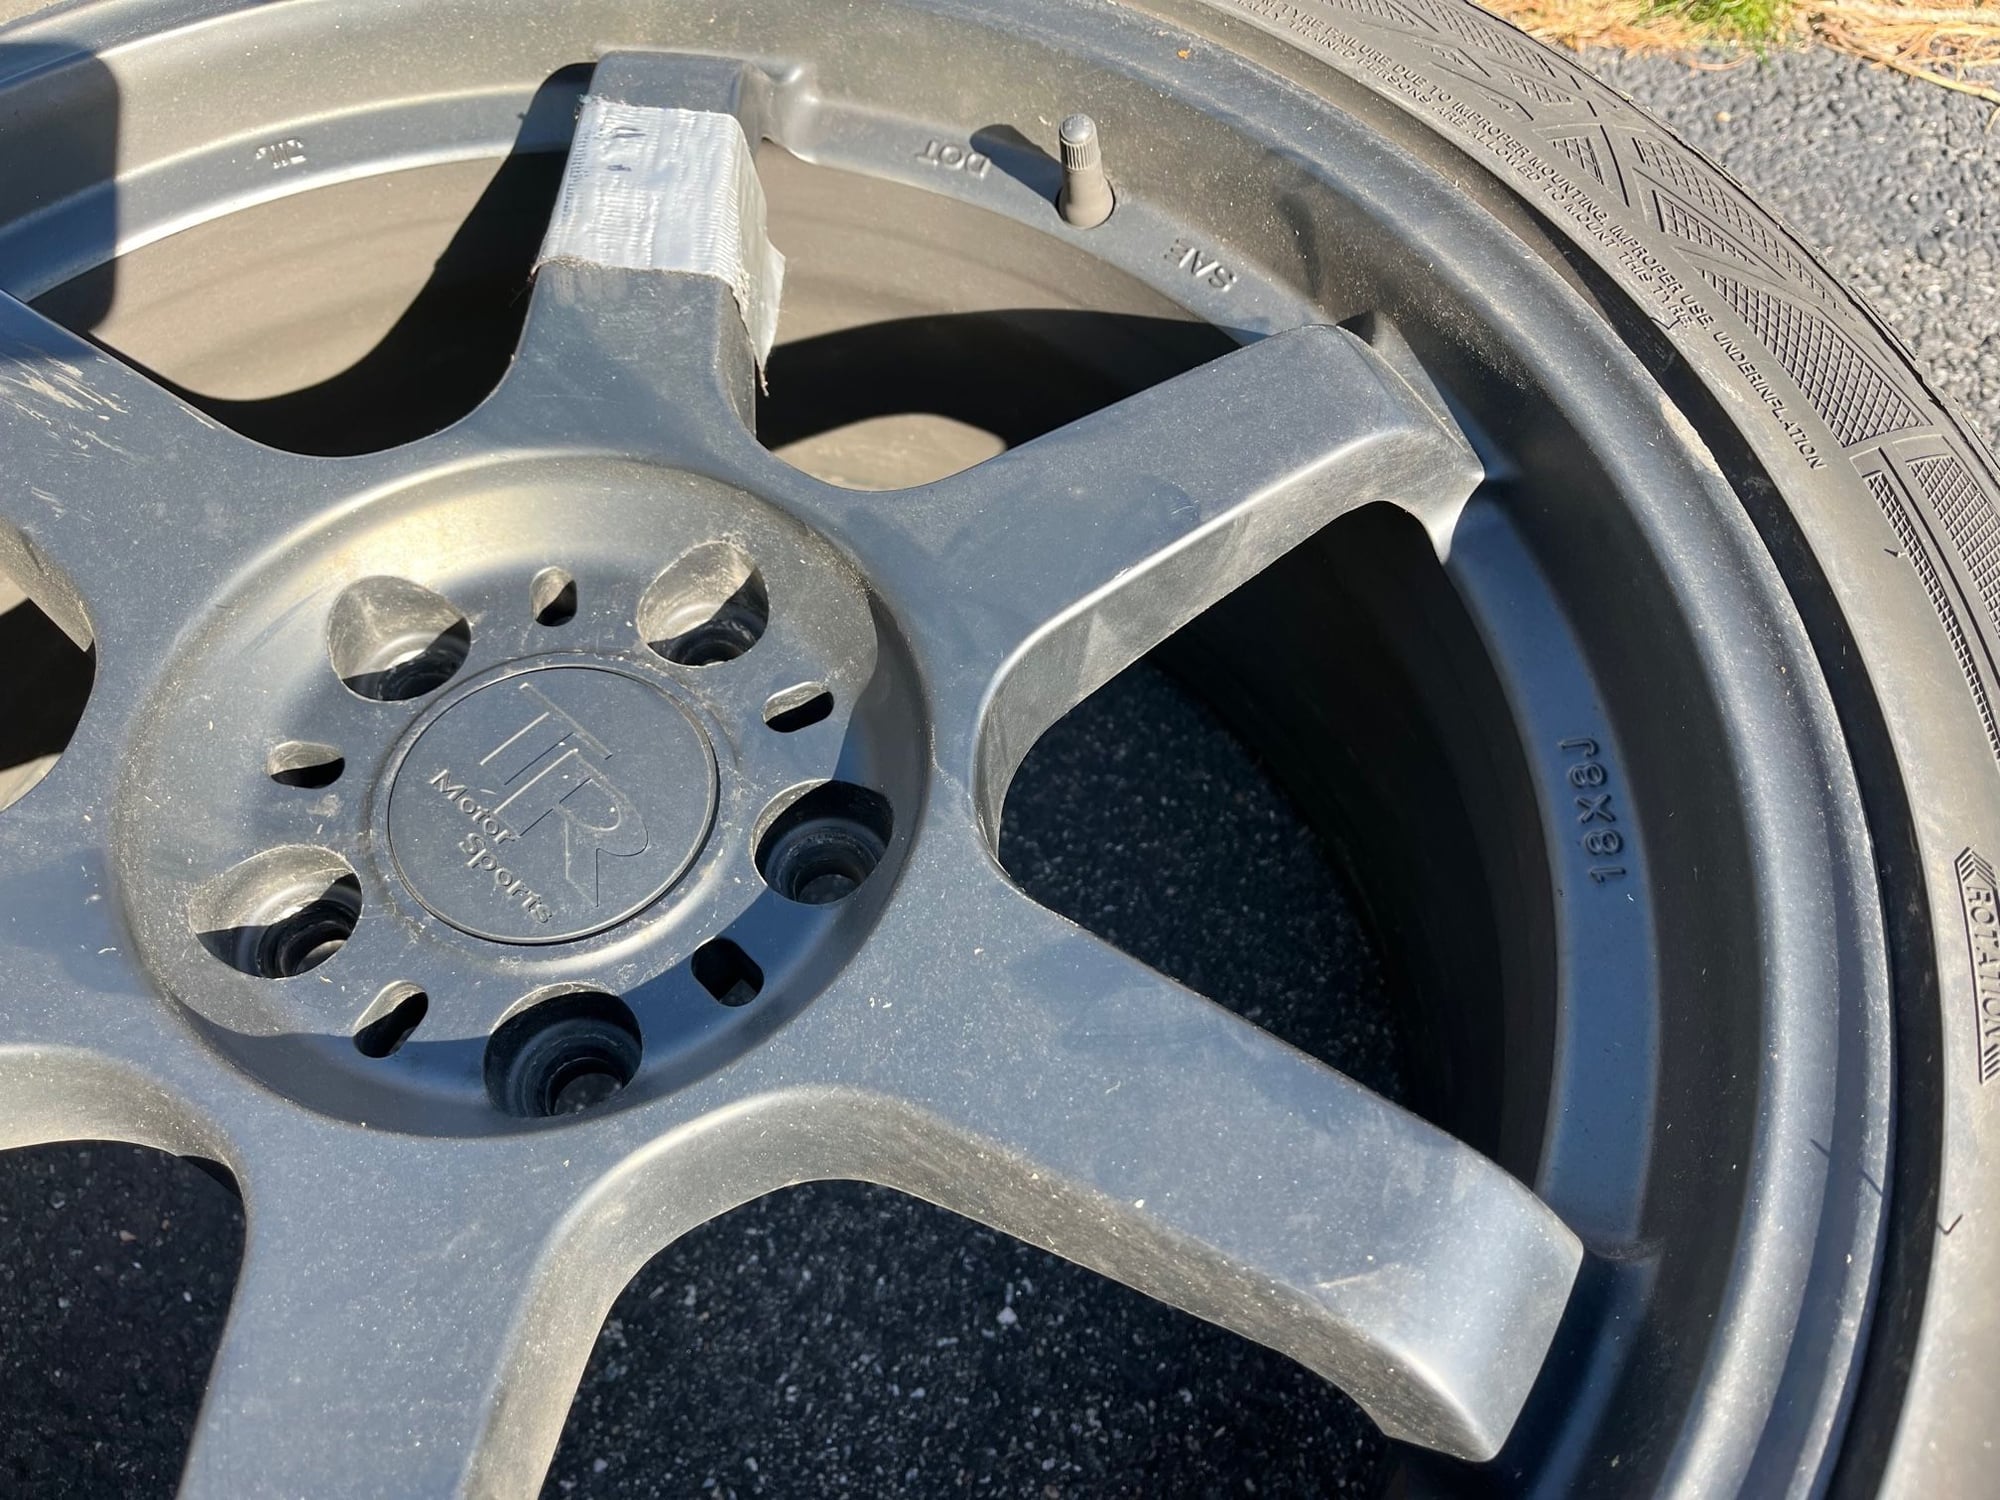 Wheels and Tires/Axles - $800 Full Winter set 18x8 TRMotorsport C4 Black w/ 245/40R18 Vredestein WintracPro XL - Used - All Years  All Models - All Years  All Models - Wilmington, MA 01887, United States